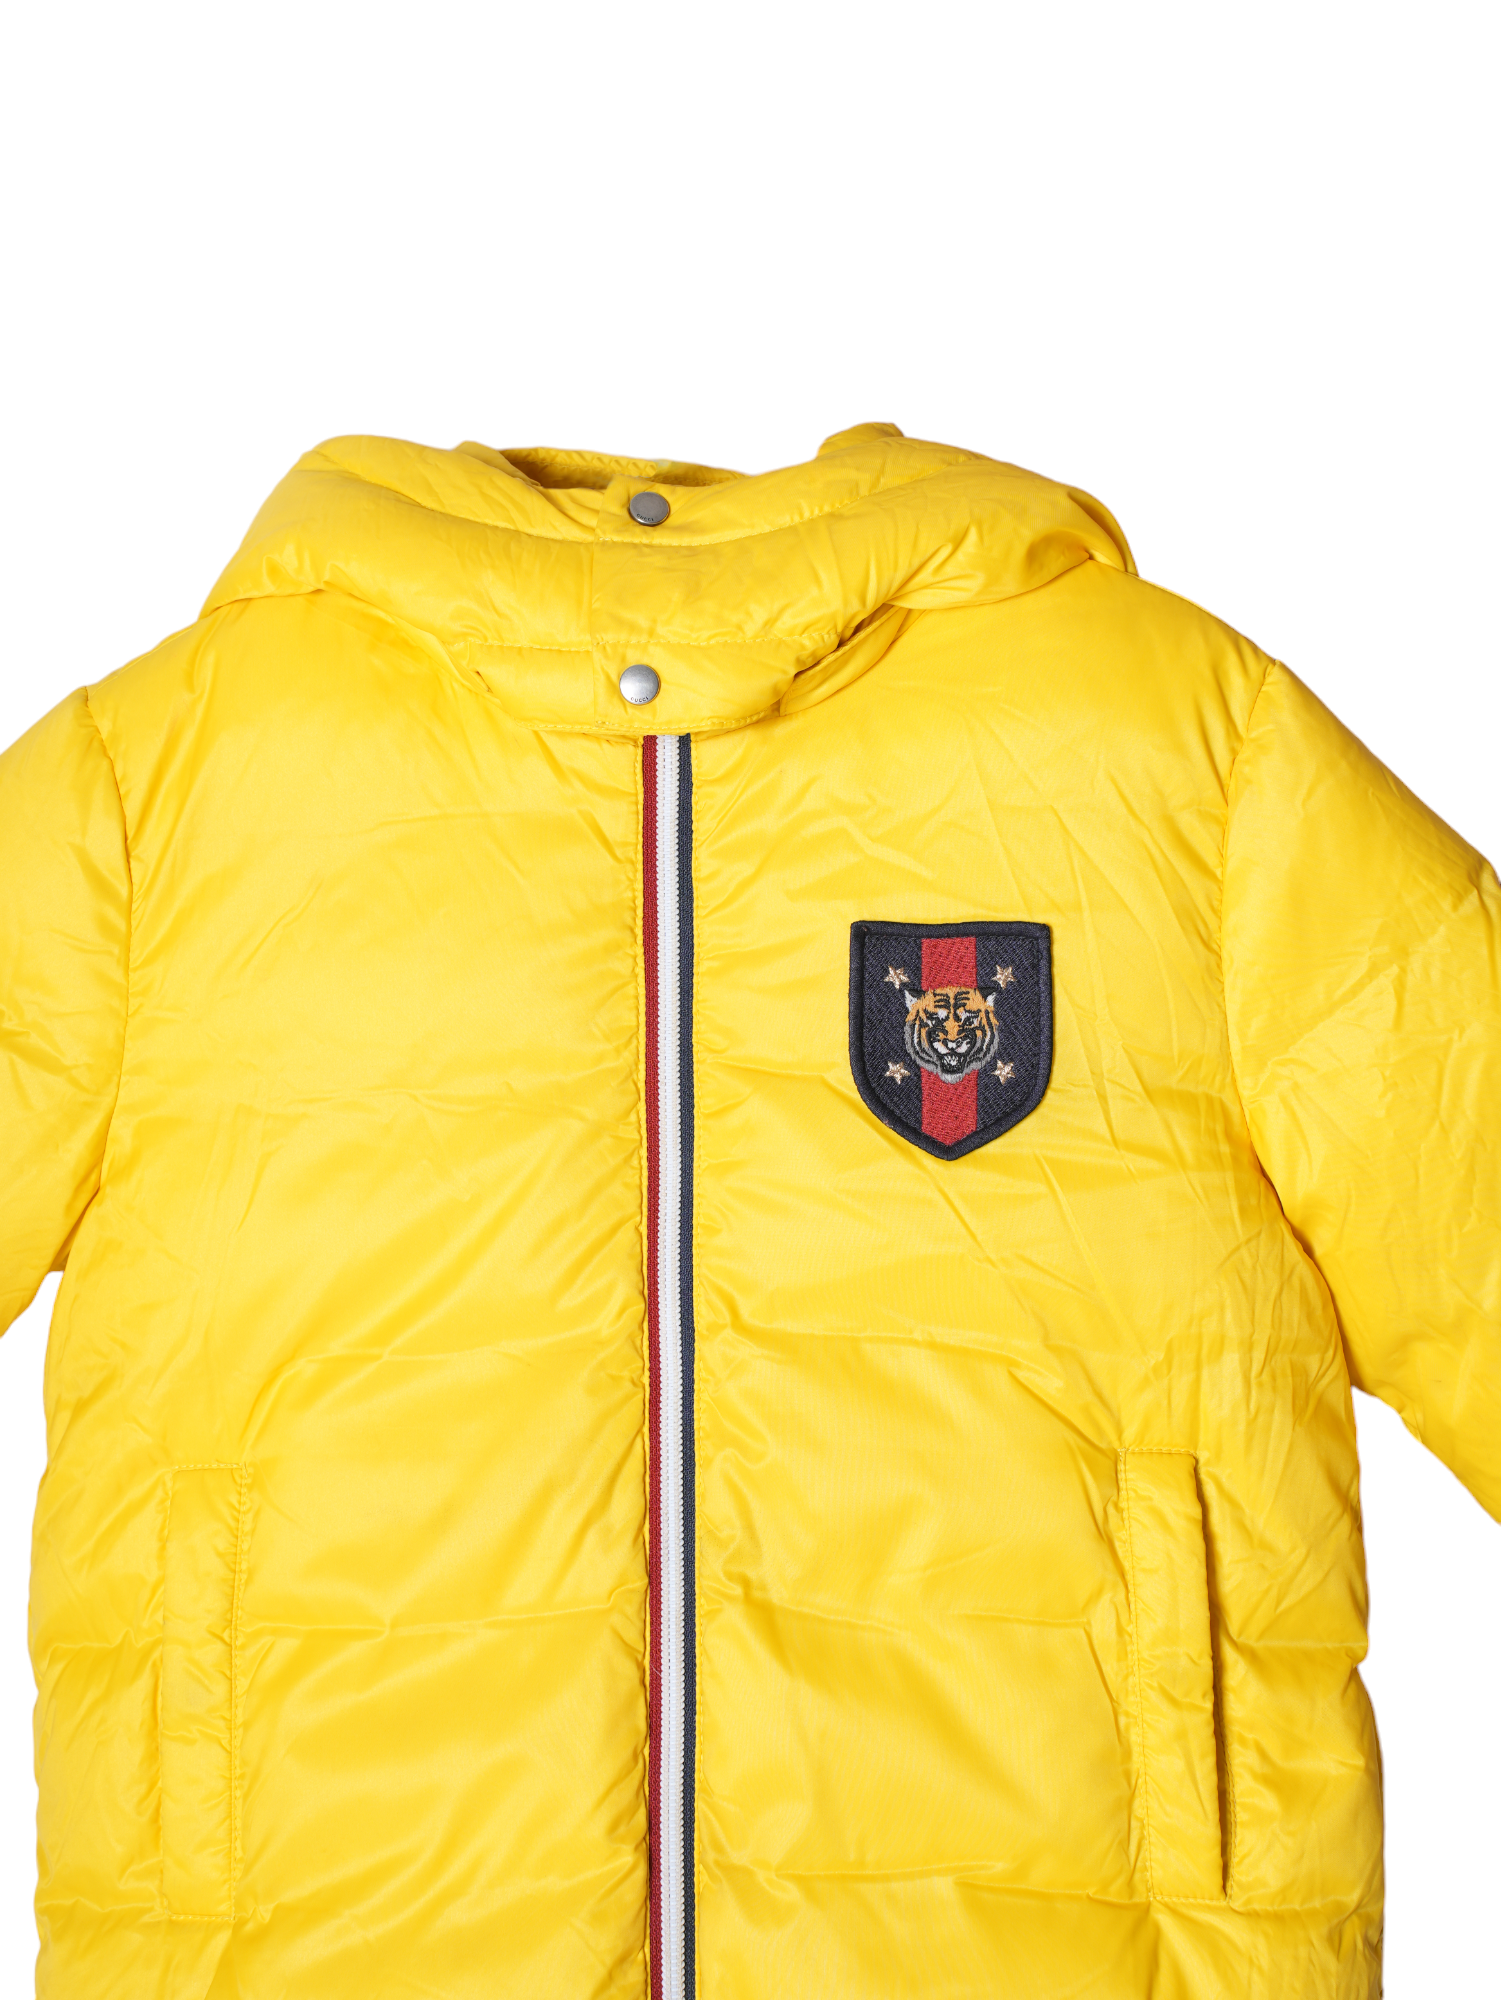 Gucci Boys Yellow Jacket With Embroidary Tiger Patch